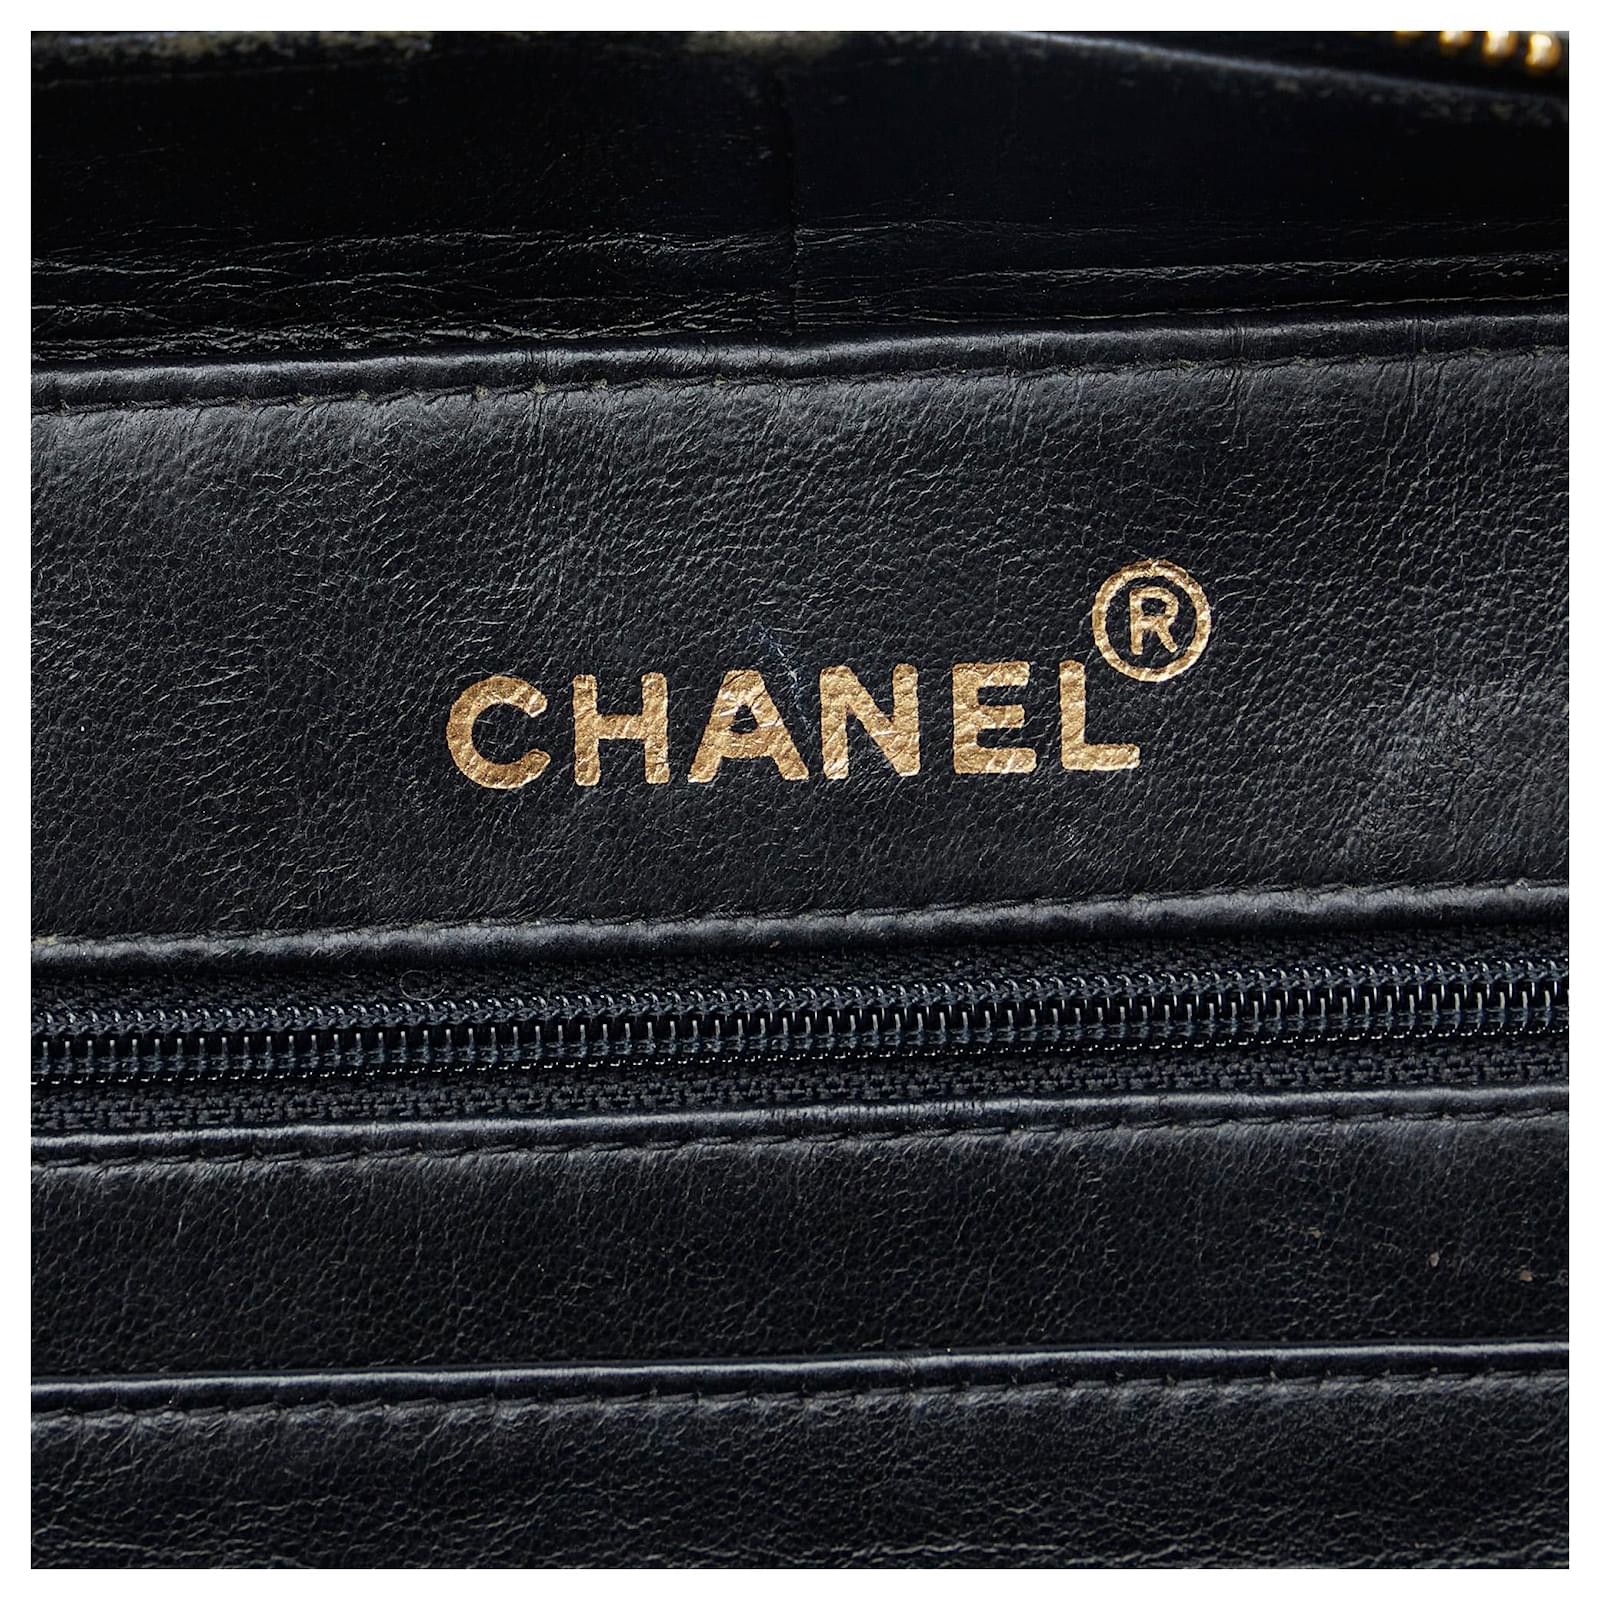 Chanel Black Patent Leather Chain Lunch Box Bag